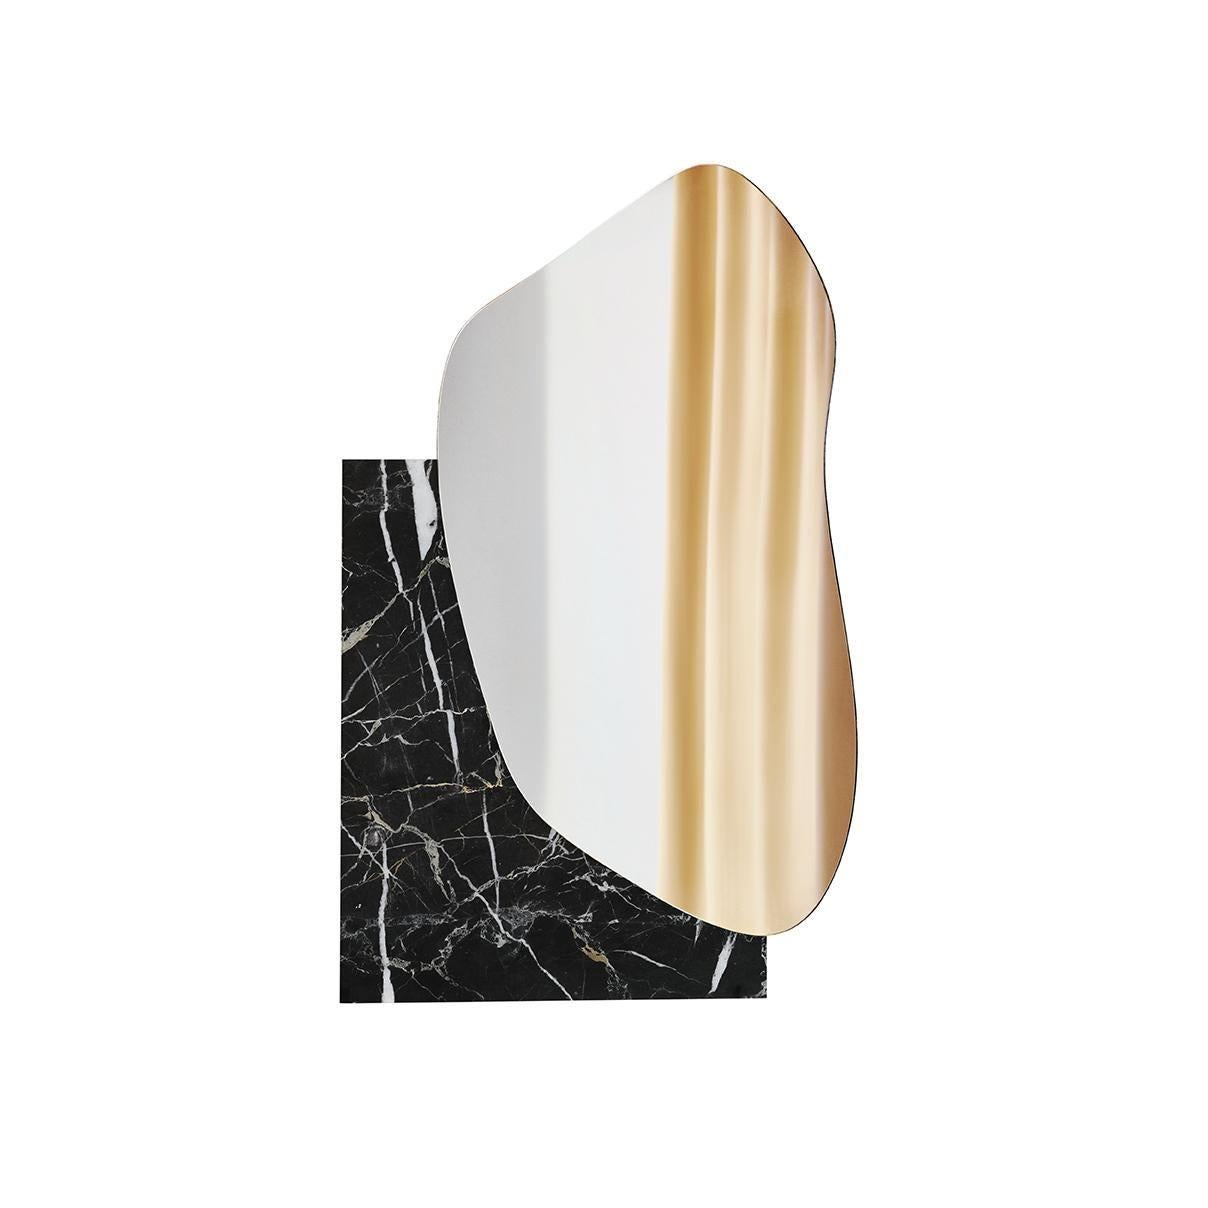 Brand: NOOM
Designers: Maryna Dague & Nathan Baraness.

Type of Mirrors: Optiwhite, Black tint mirror, Copper tint mirror.
Materials for base: Veneered wood, Madrona wood veneer, Burned steel, Stainless steel / Hand brushed stainless steel, Brushed